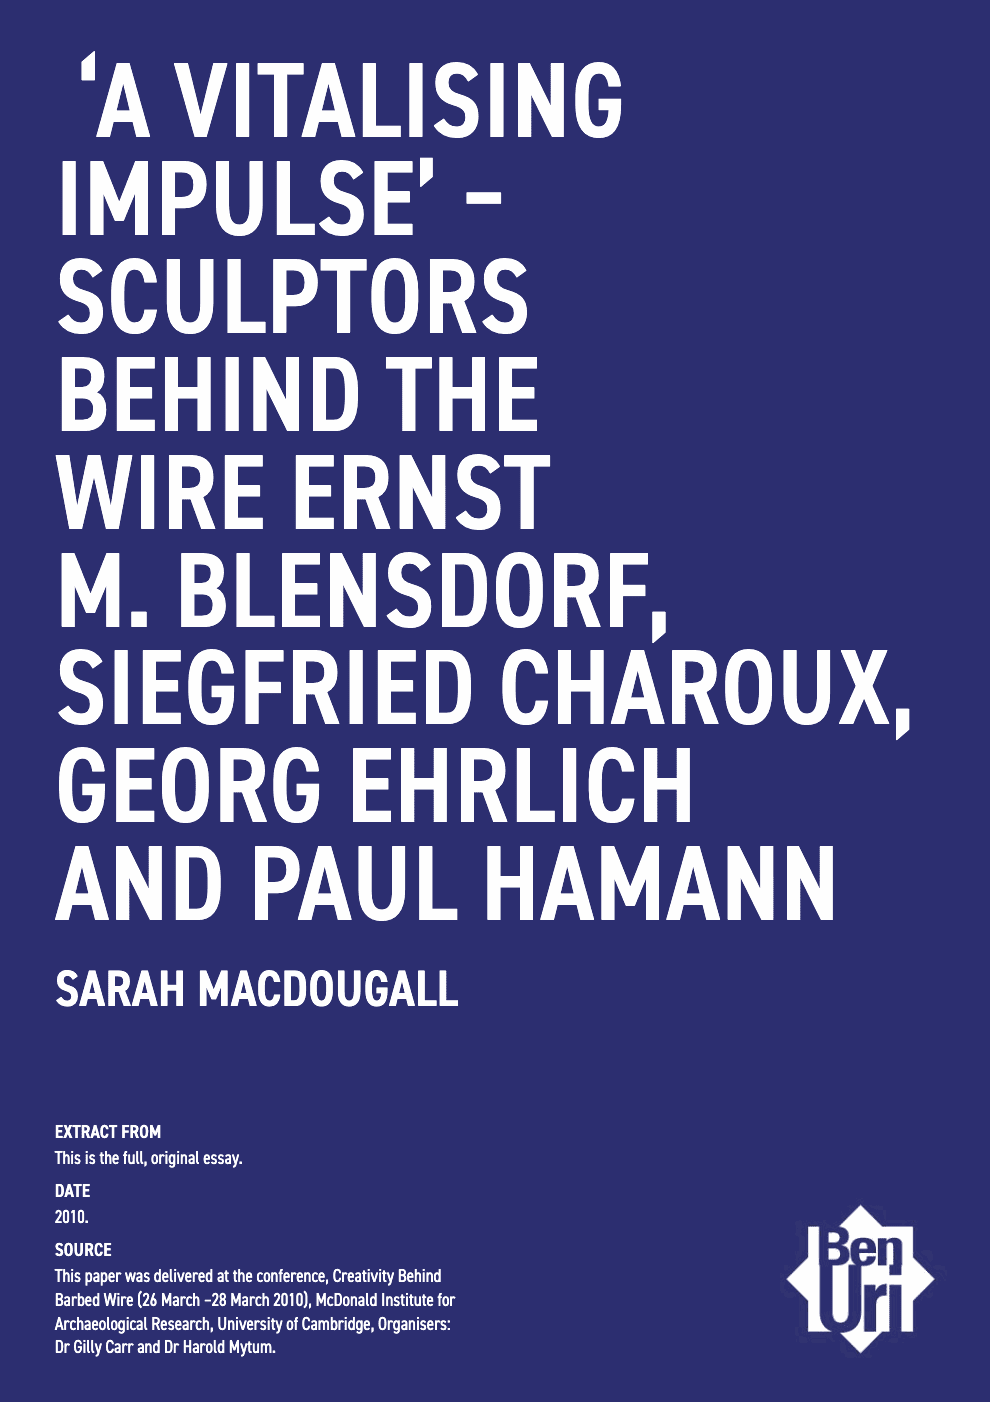 A Vitalising Impulse: Sculptors behind the wire by Sarah MacDougall Read it here